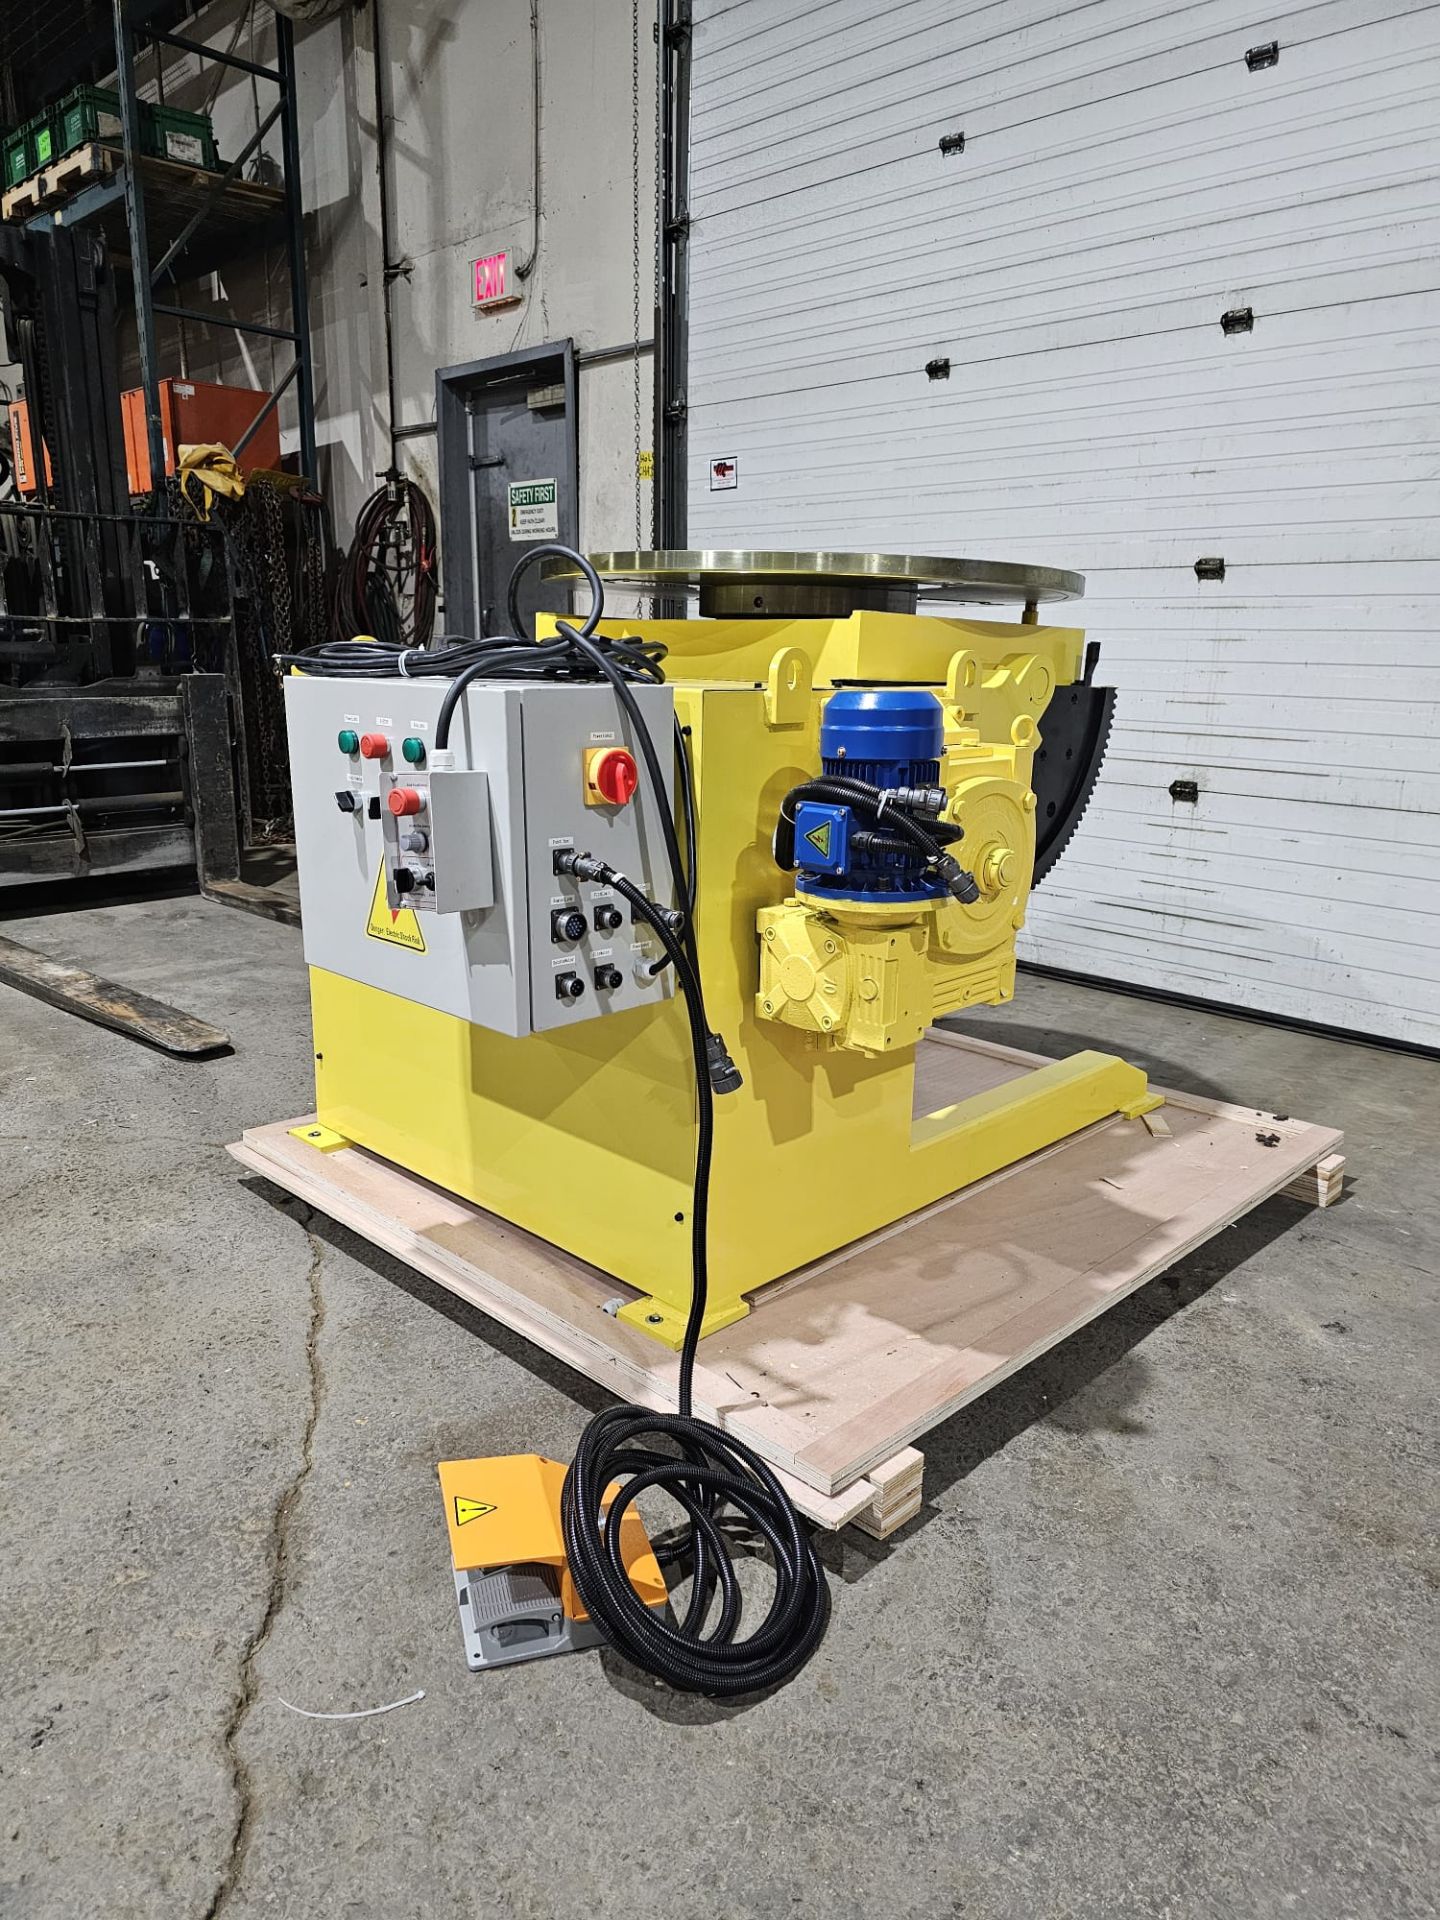 Verner model VD-2500 WELDING POSITIONER 2500lbs capacity - tilt and rotate with variable speed drive - Image 4 of 7